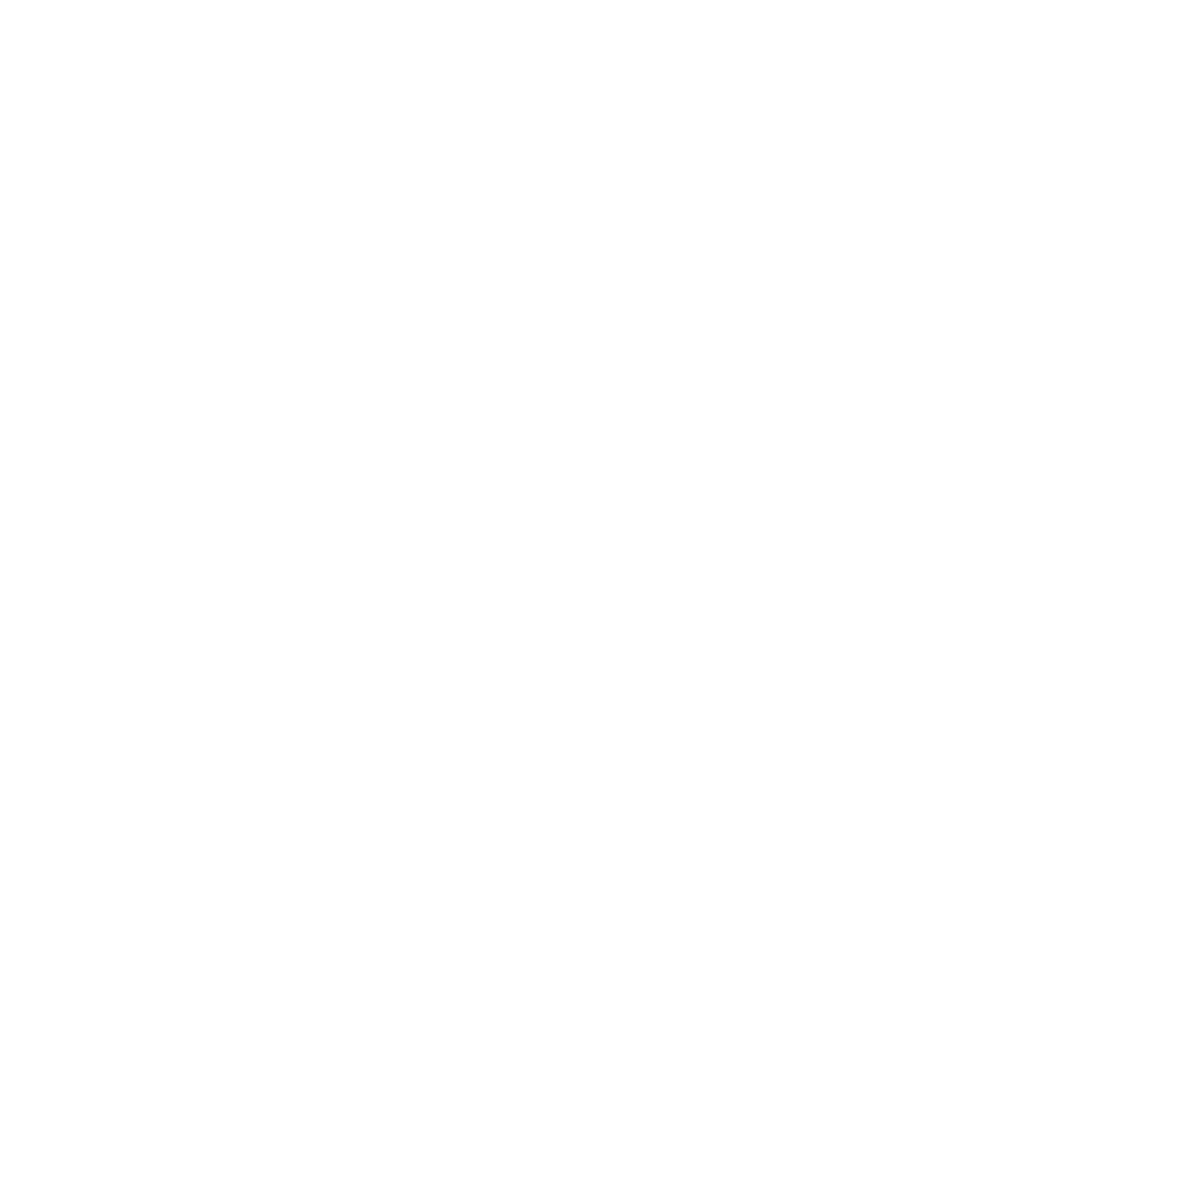 AA 4 star country house hotel logo white